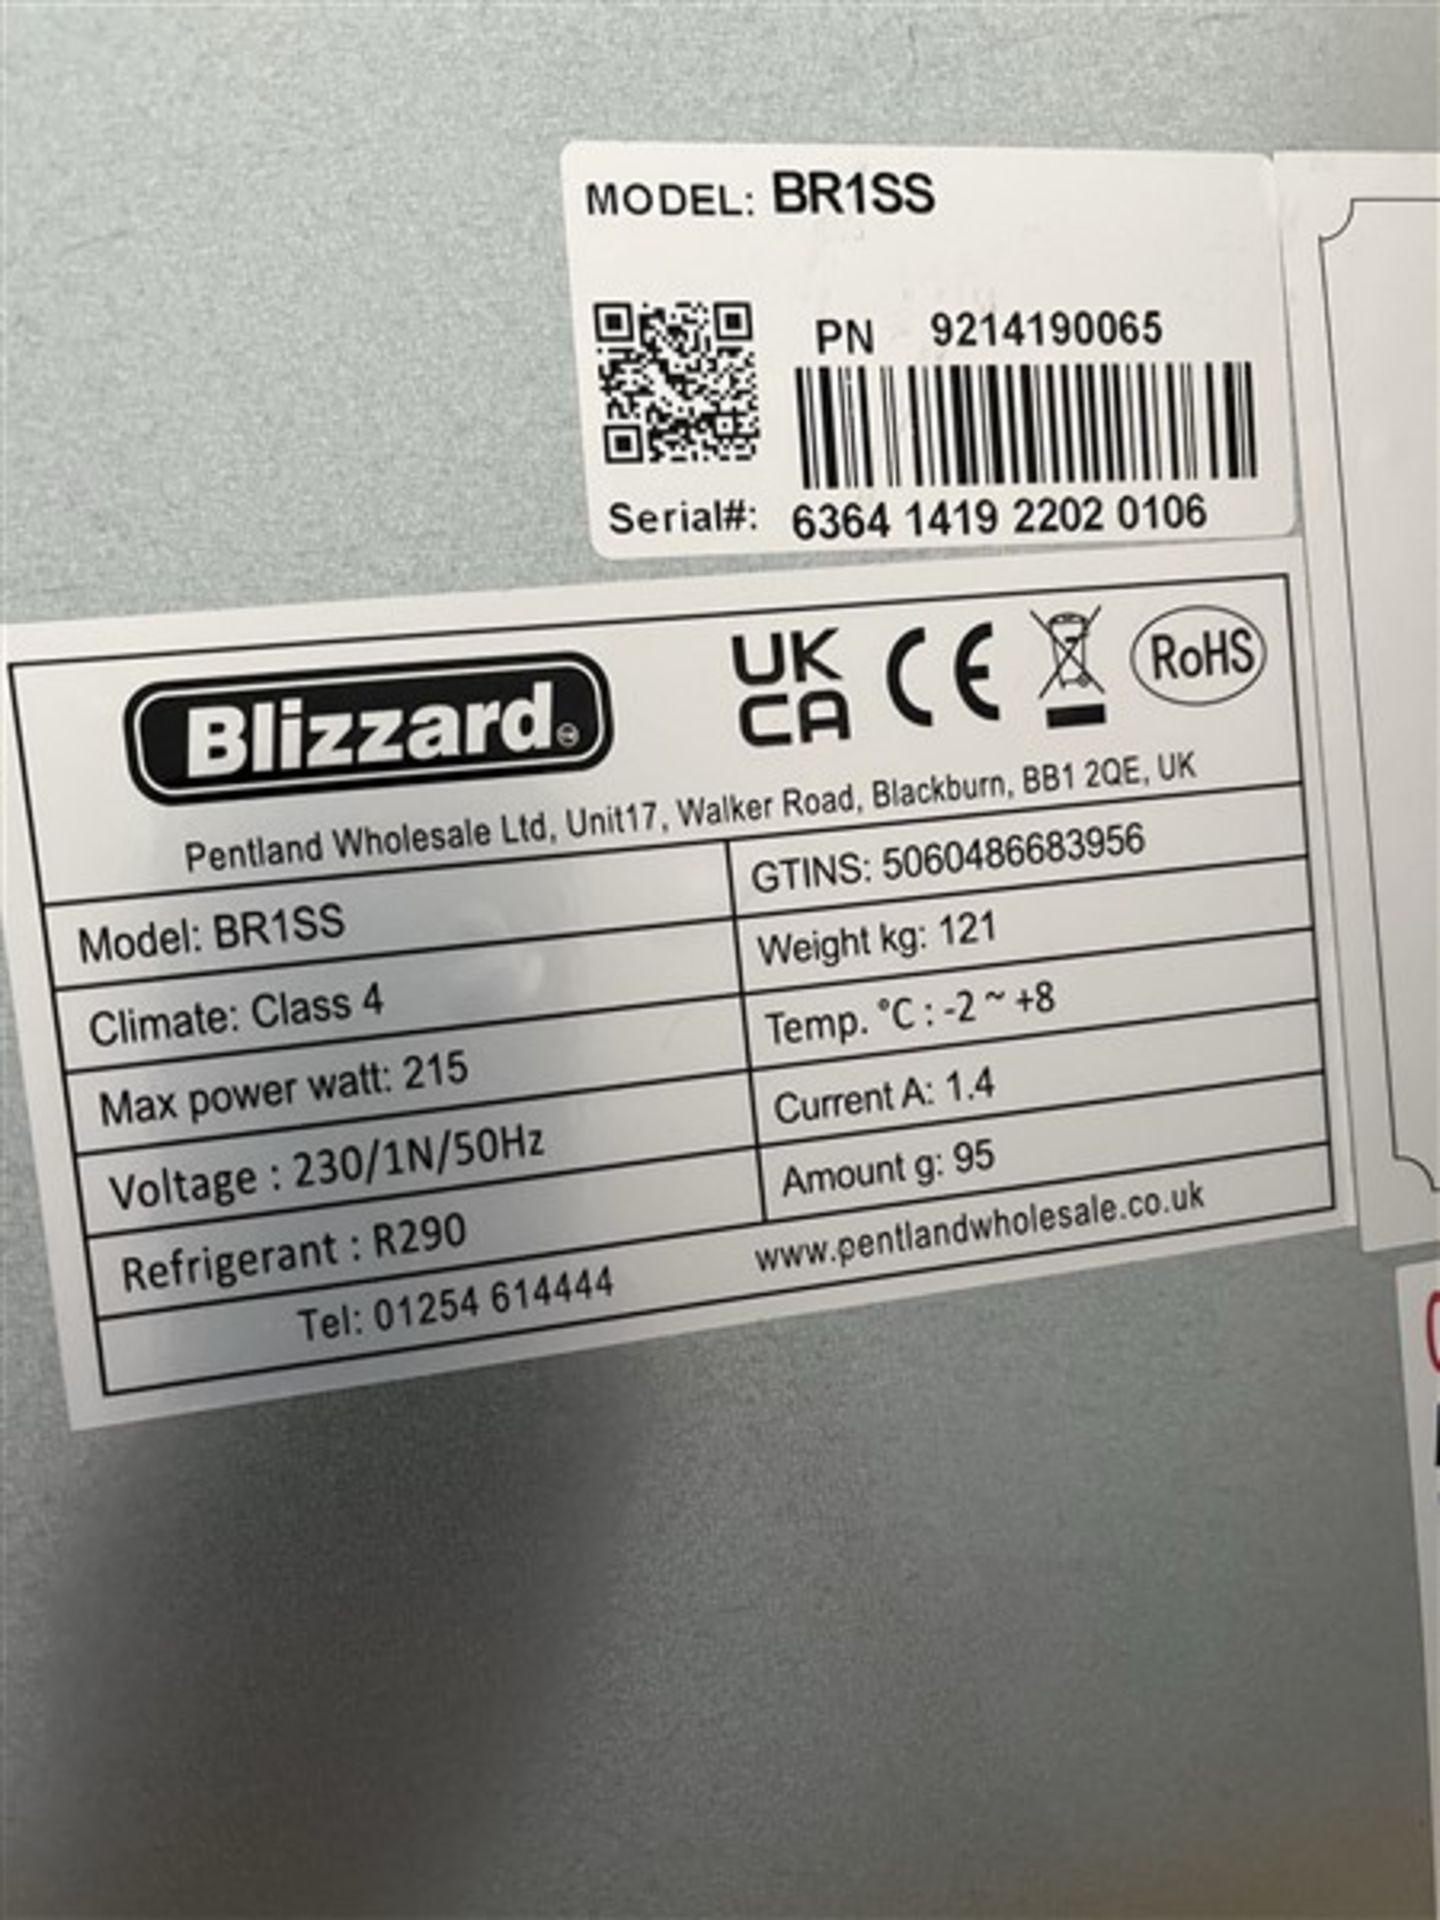 Blizzard BR1SS stainless steel refrigerator, serial o. 6364 1419 2202 0106 - Image 3 of 4